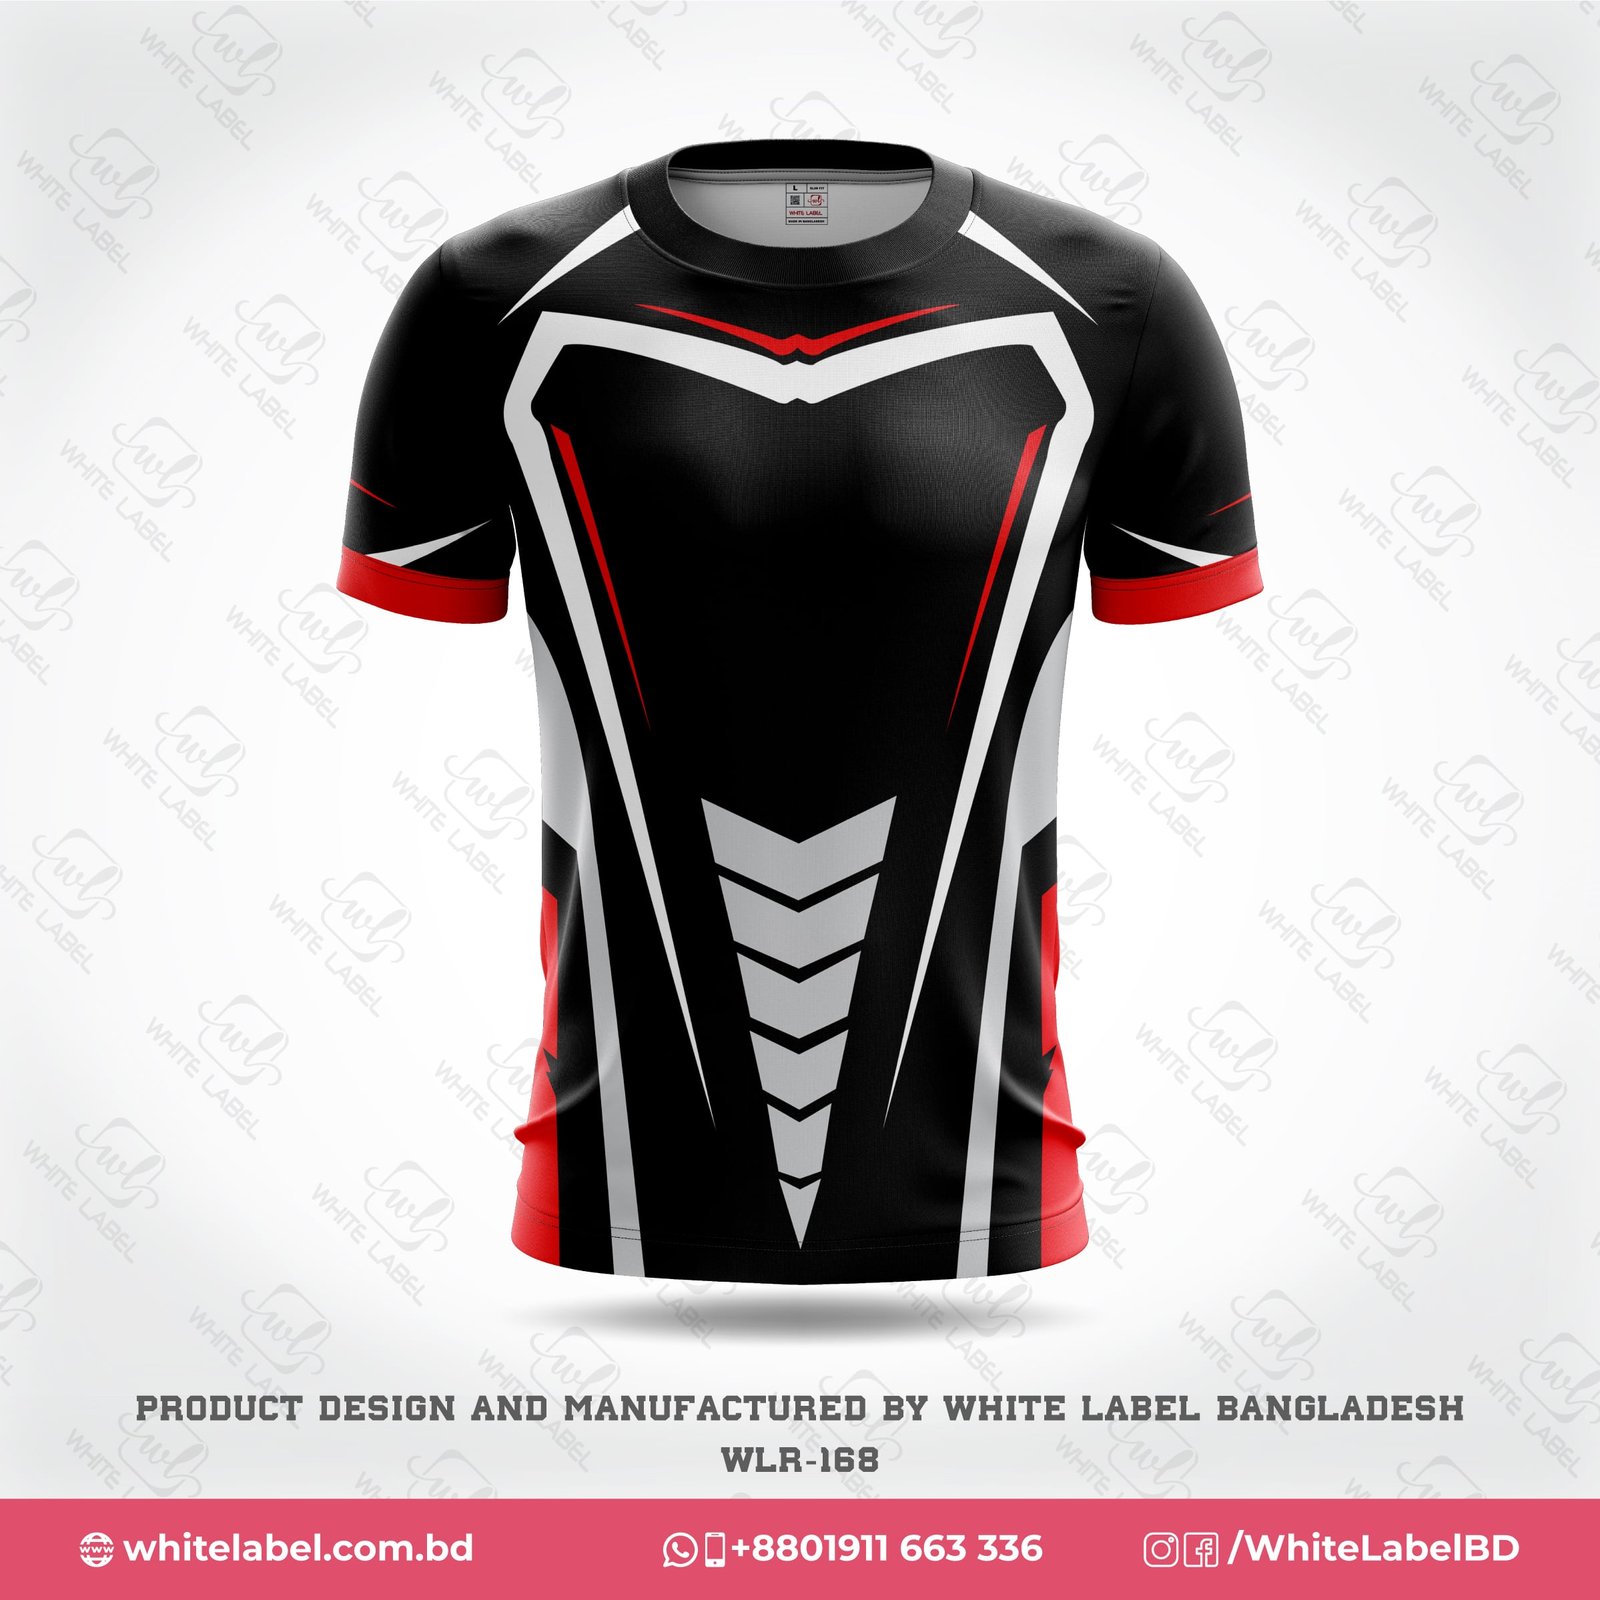 PREMIUM FIT CUSTOM SUBLIMATED JERSEY - SERIES 1 BLACK AND WHITE